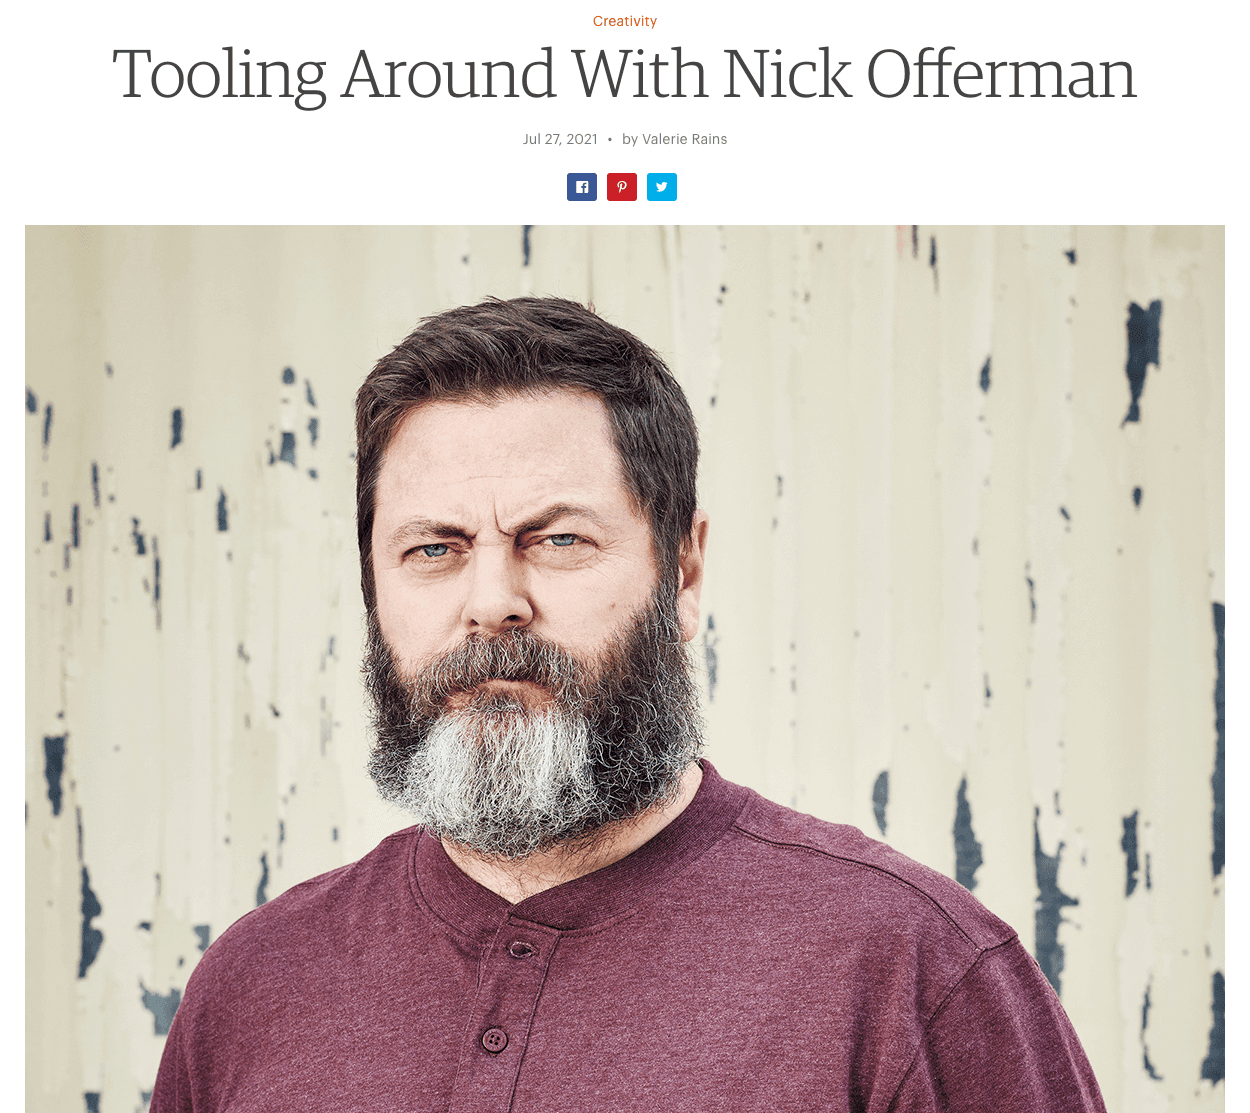 Interview with Nick Offerman from Etsy